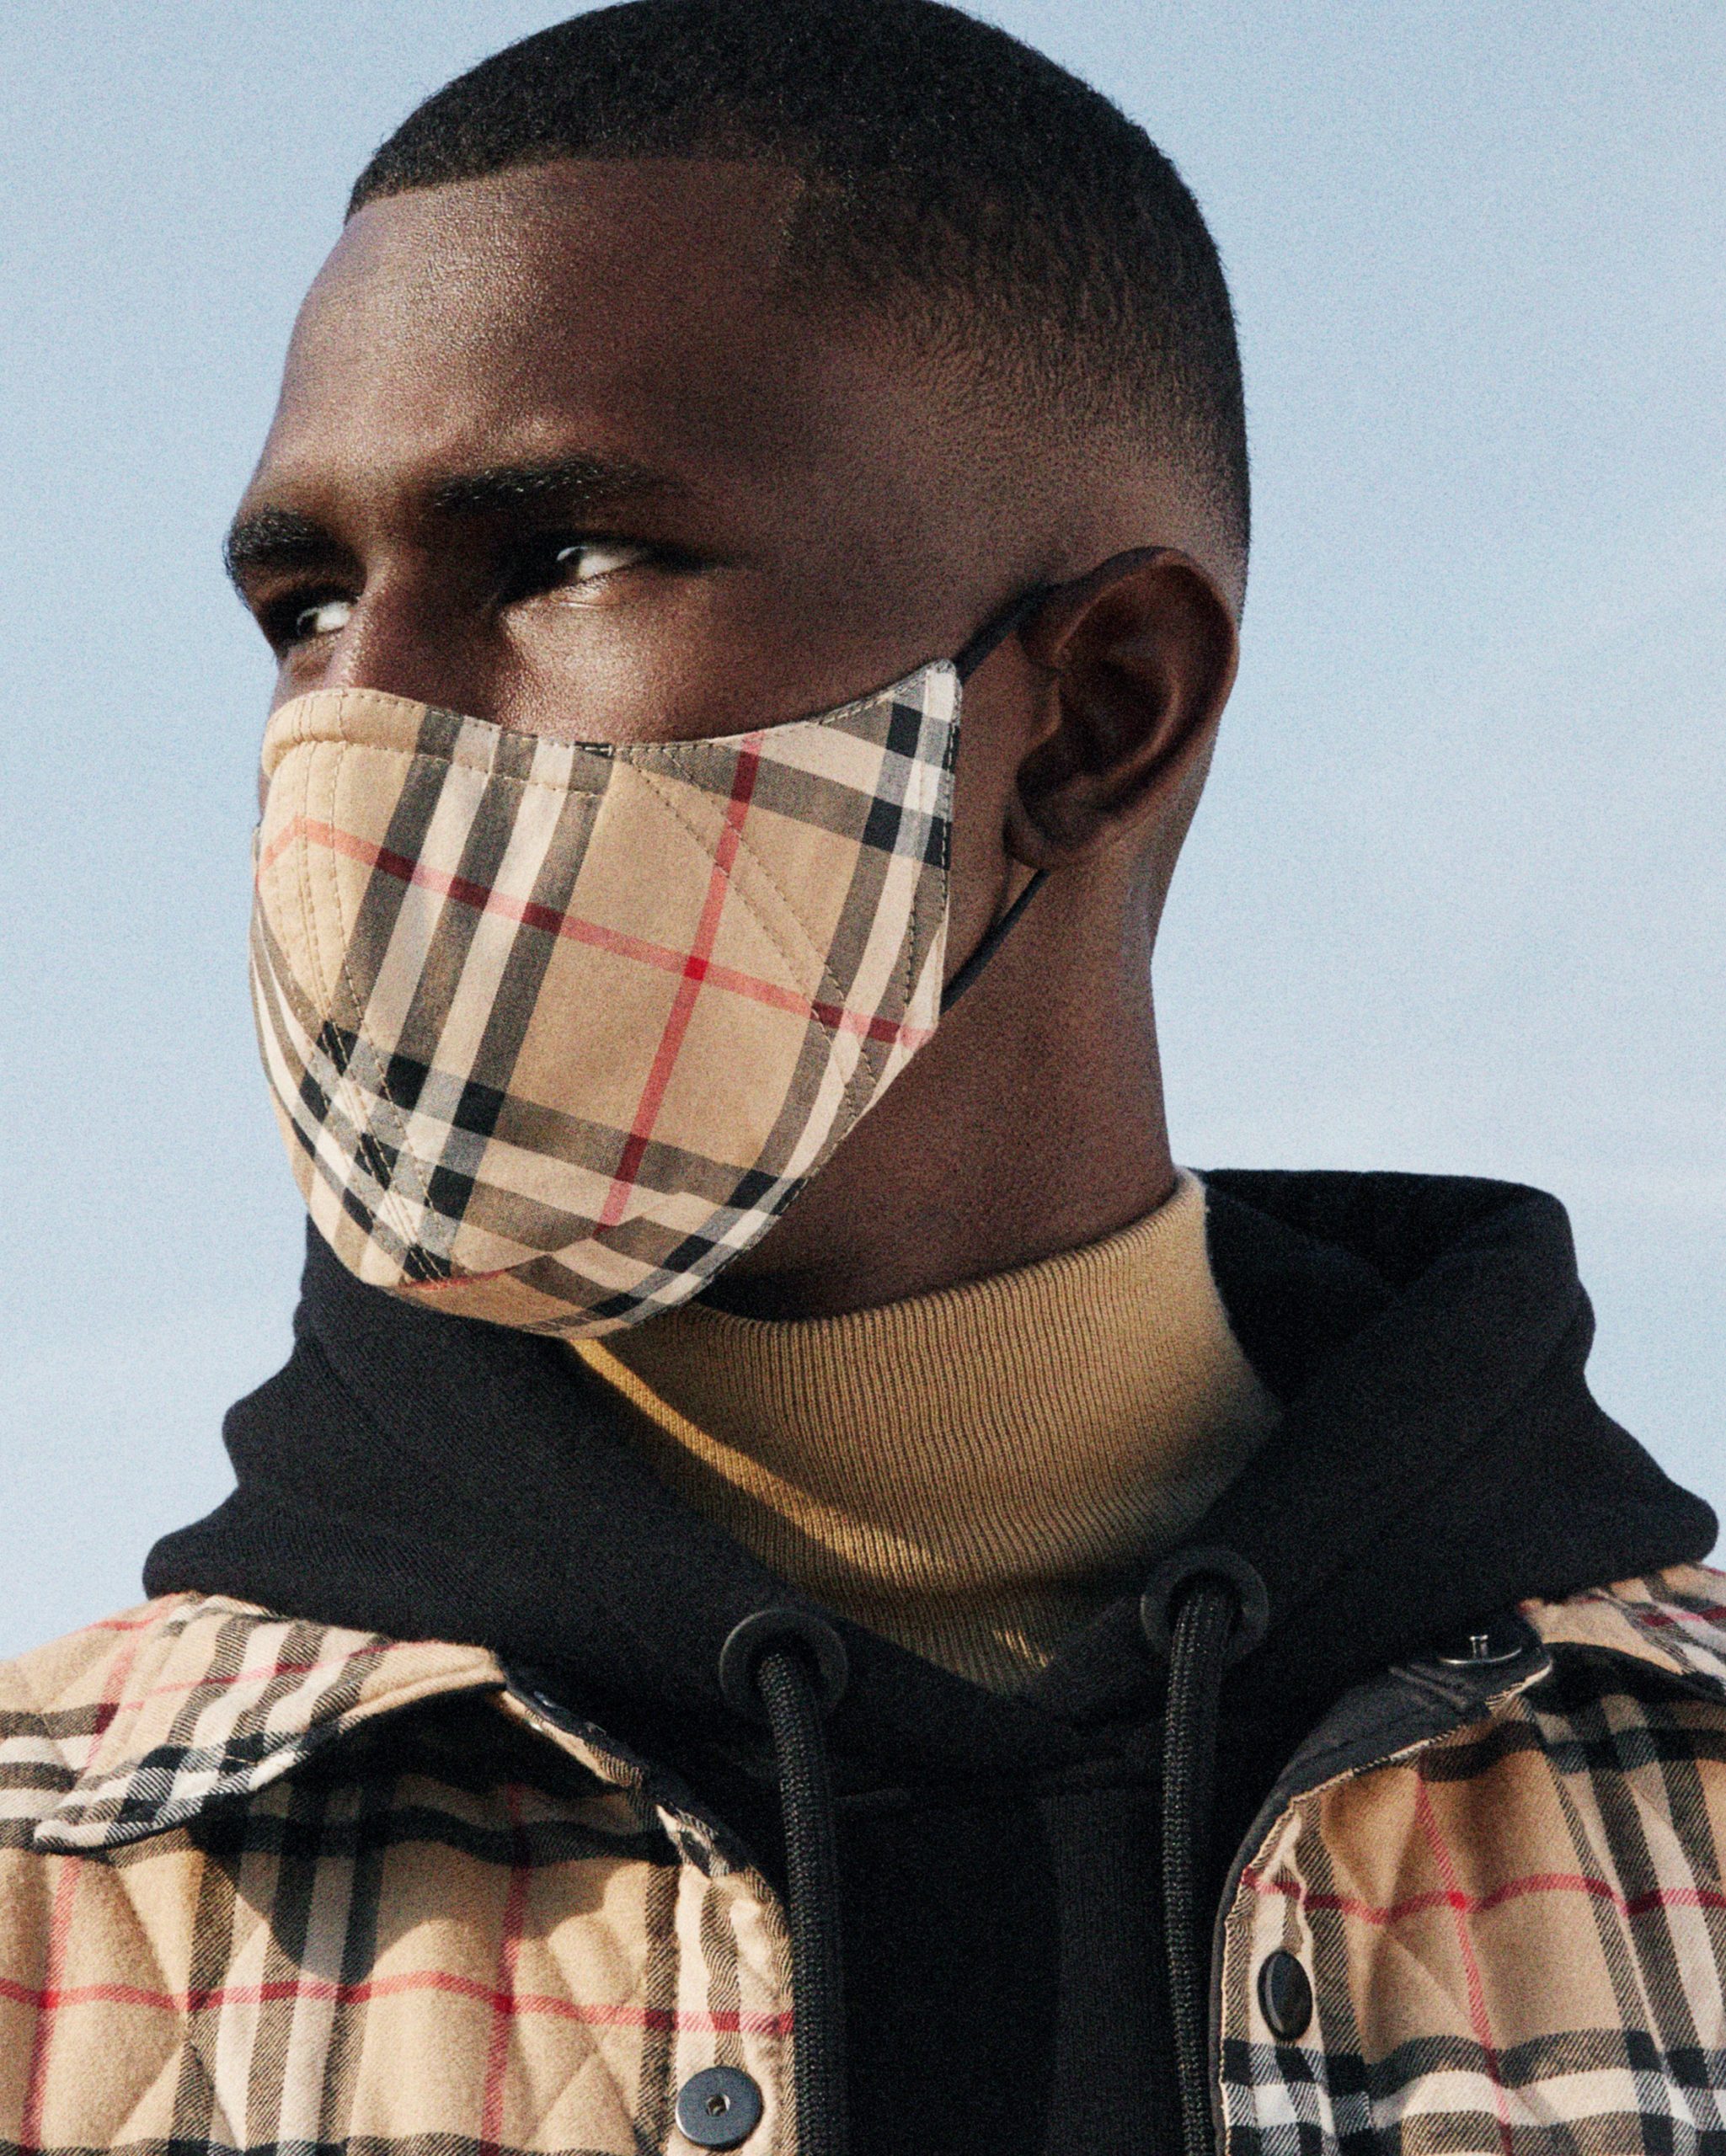 Burberry face masks are made of plaid cotton